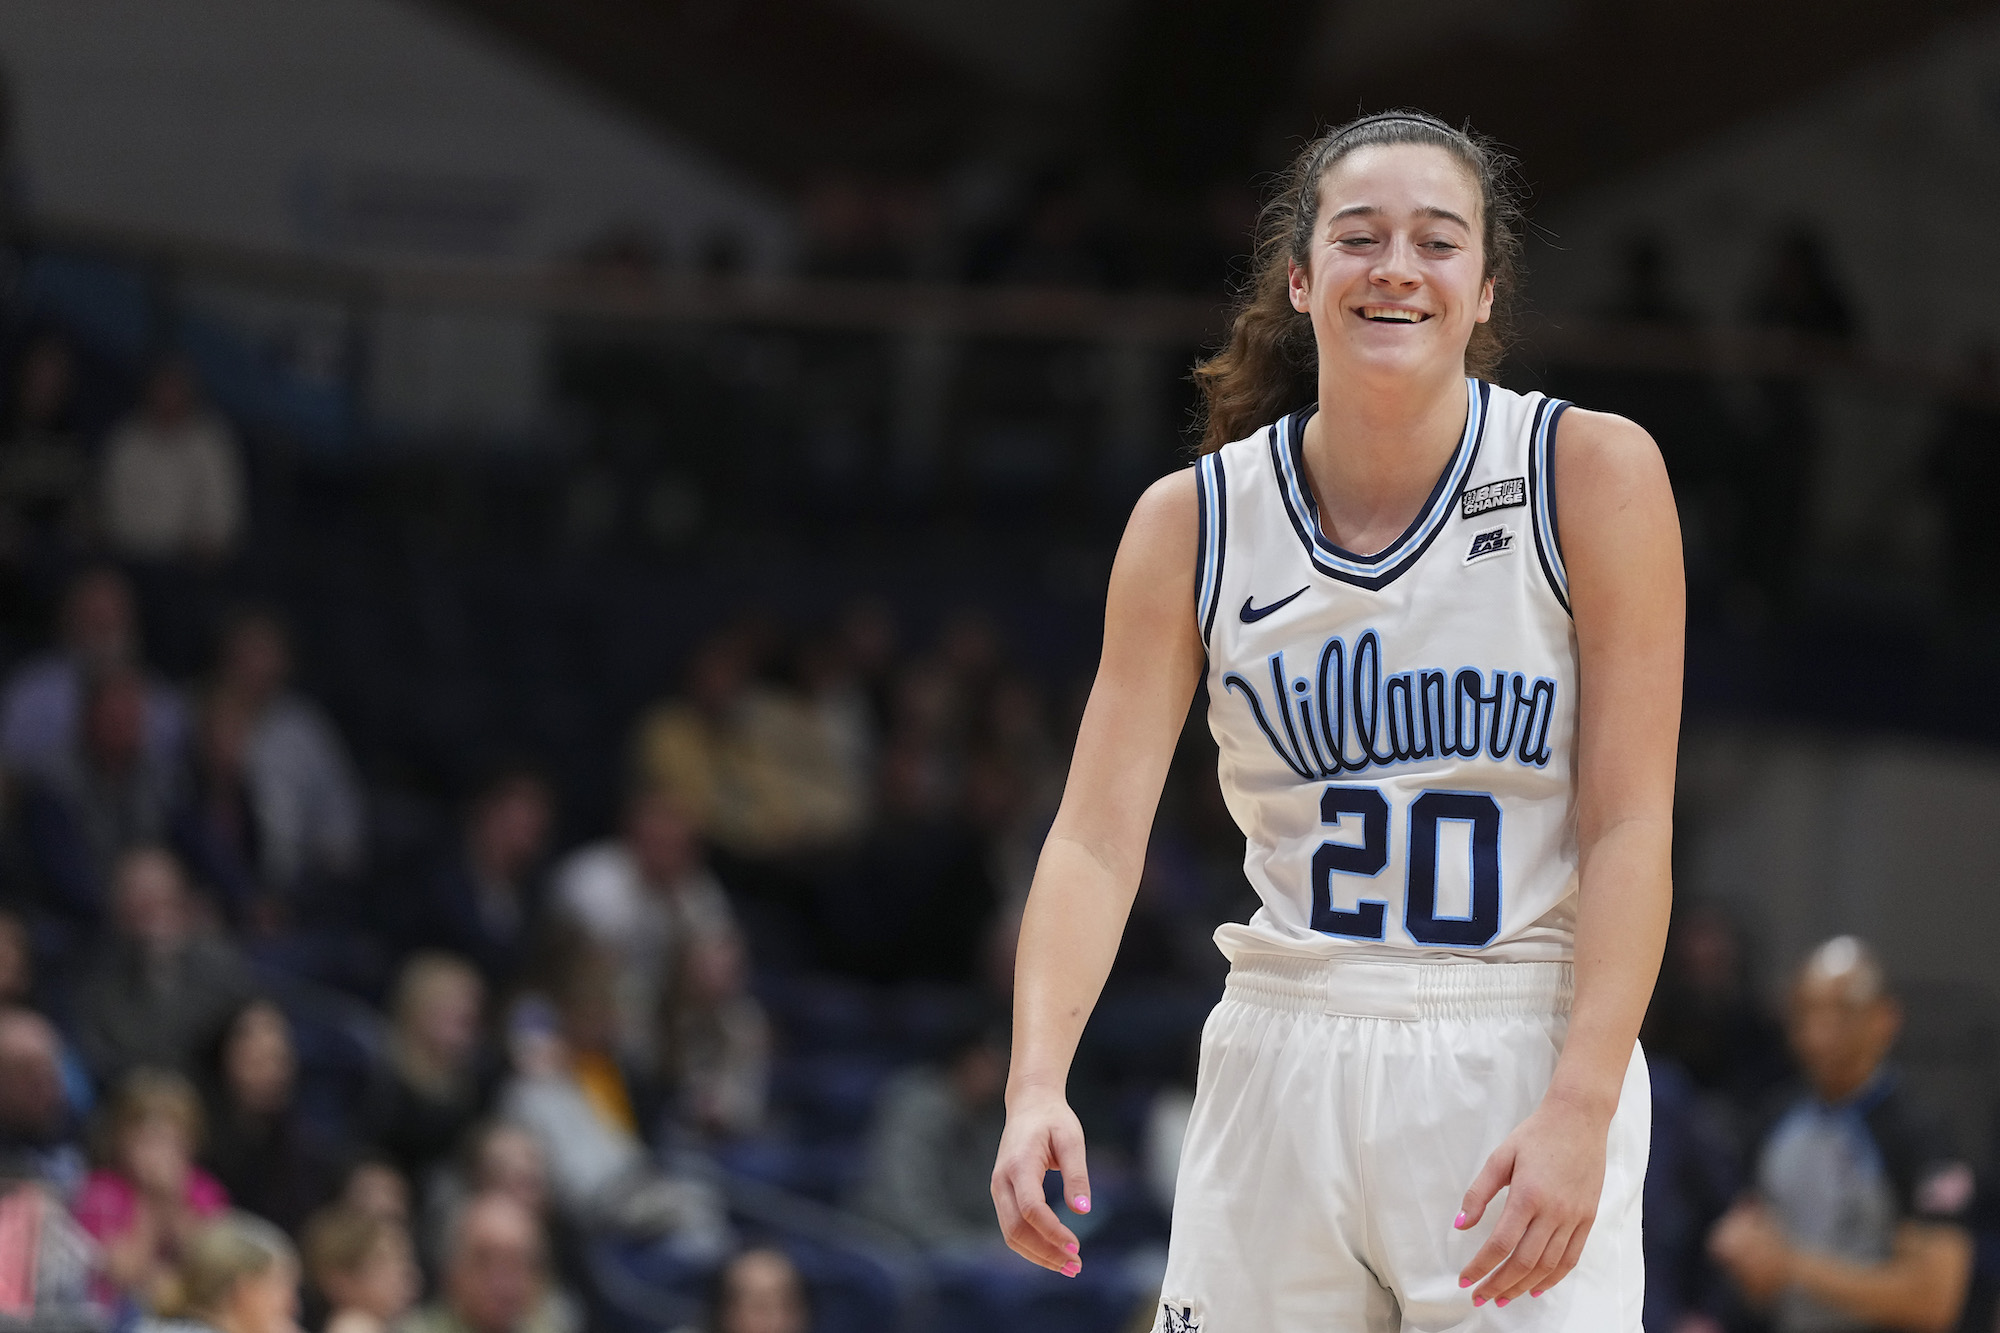 VILLANOVA, PA - JANUARY 17: Maddy Siegrist #20 of the Villanova Wildcats reacts against the Xavier Musketeers in the second half at Finneran Pavilion on January 17, 2023 in Villanova, Pennsylvania. The Villanova Wildcats defeated the Xavier Musketeers 76-38. (Photo by Mitchell Leff/Getty Images)